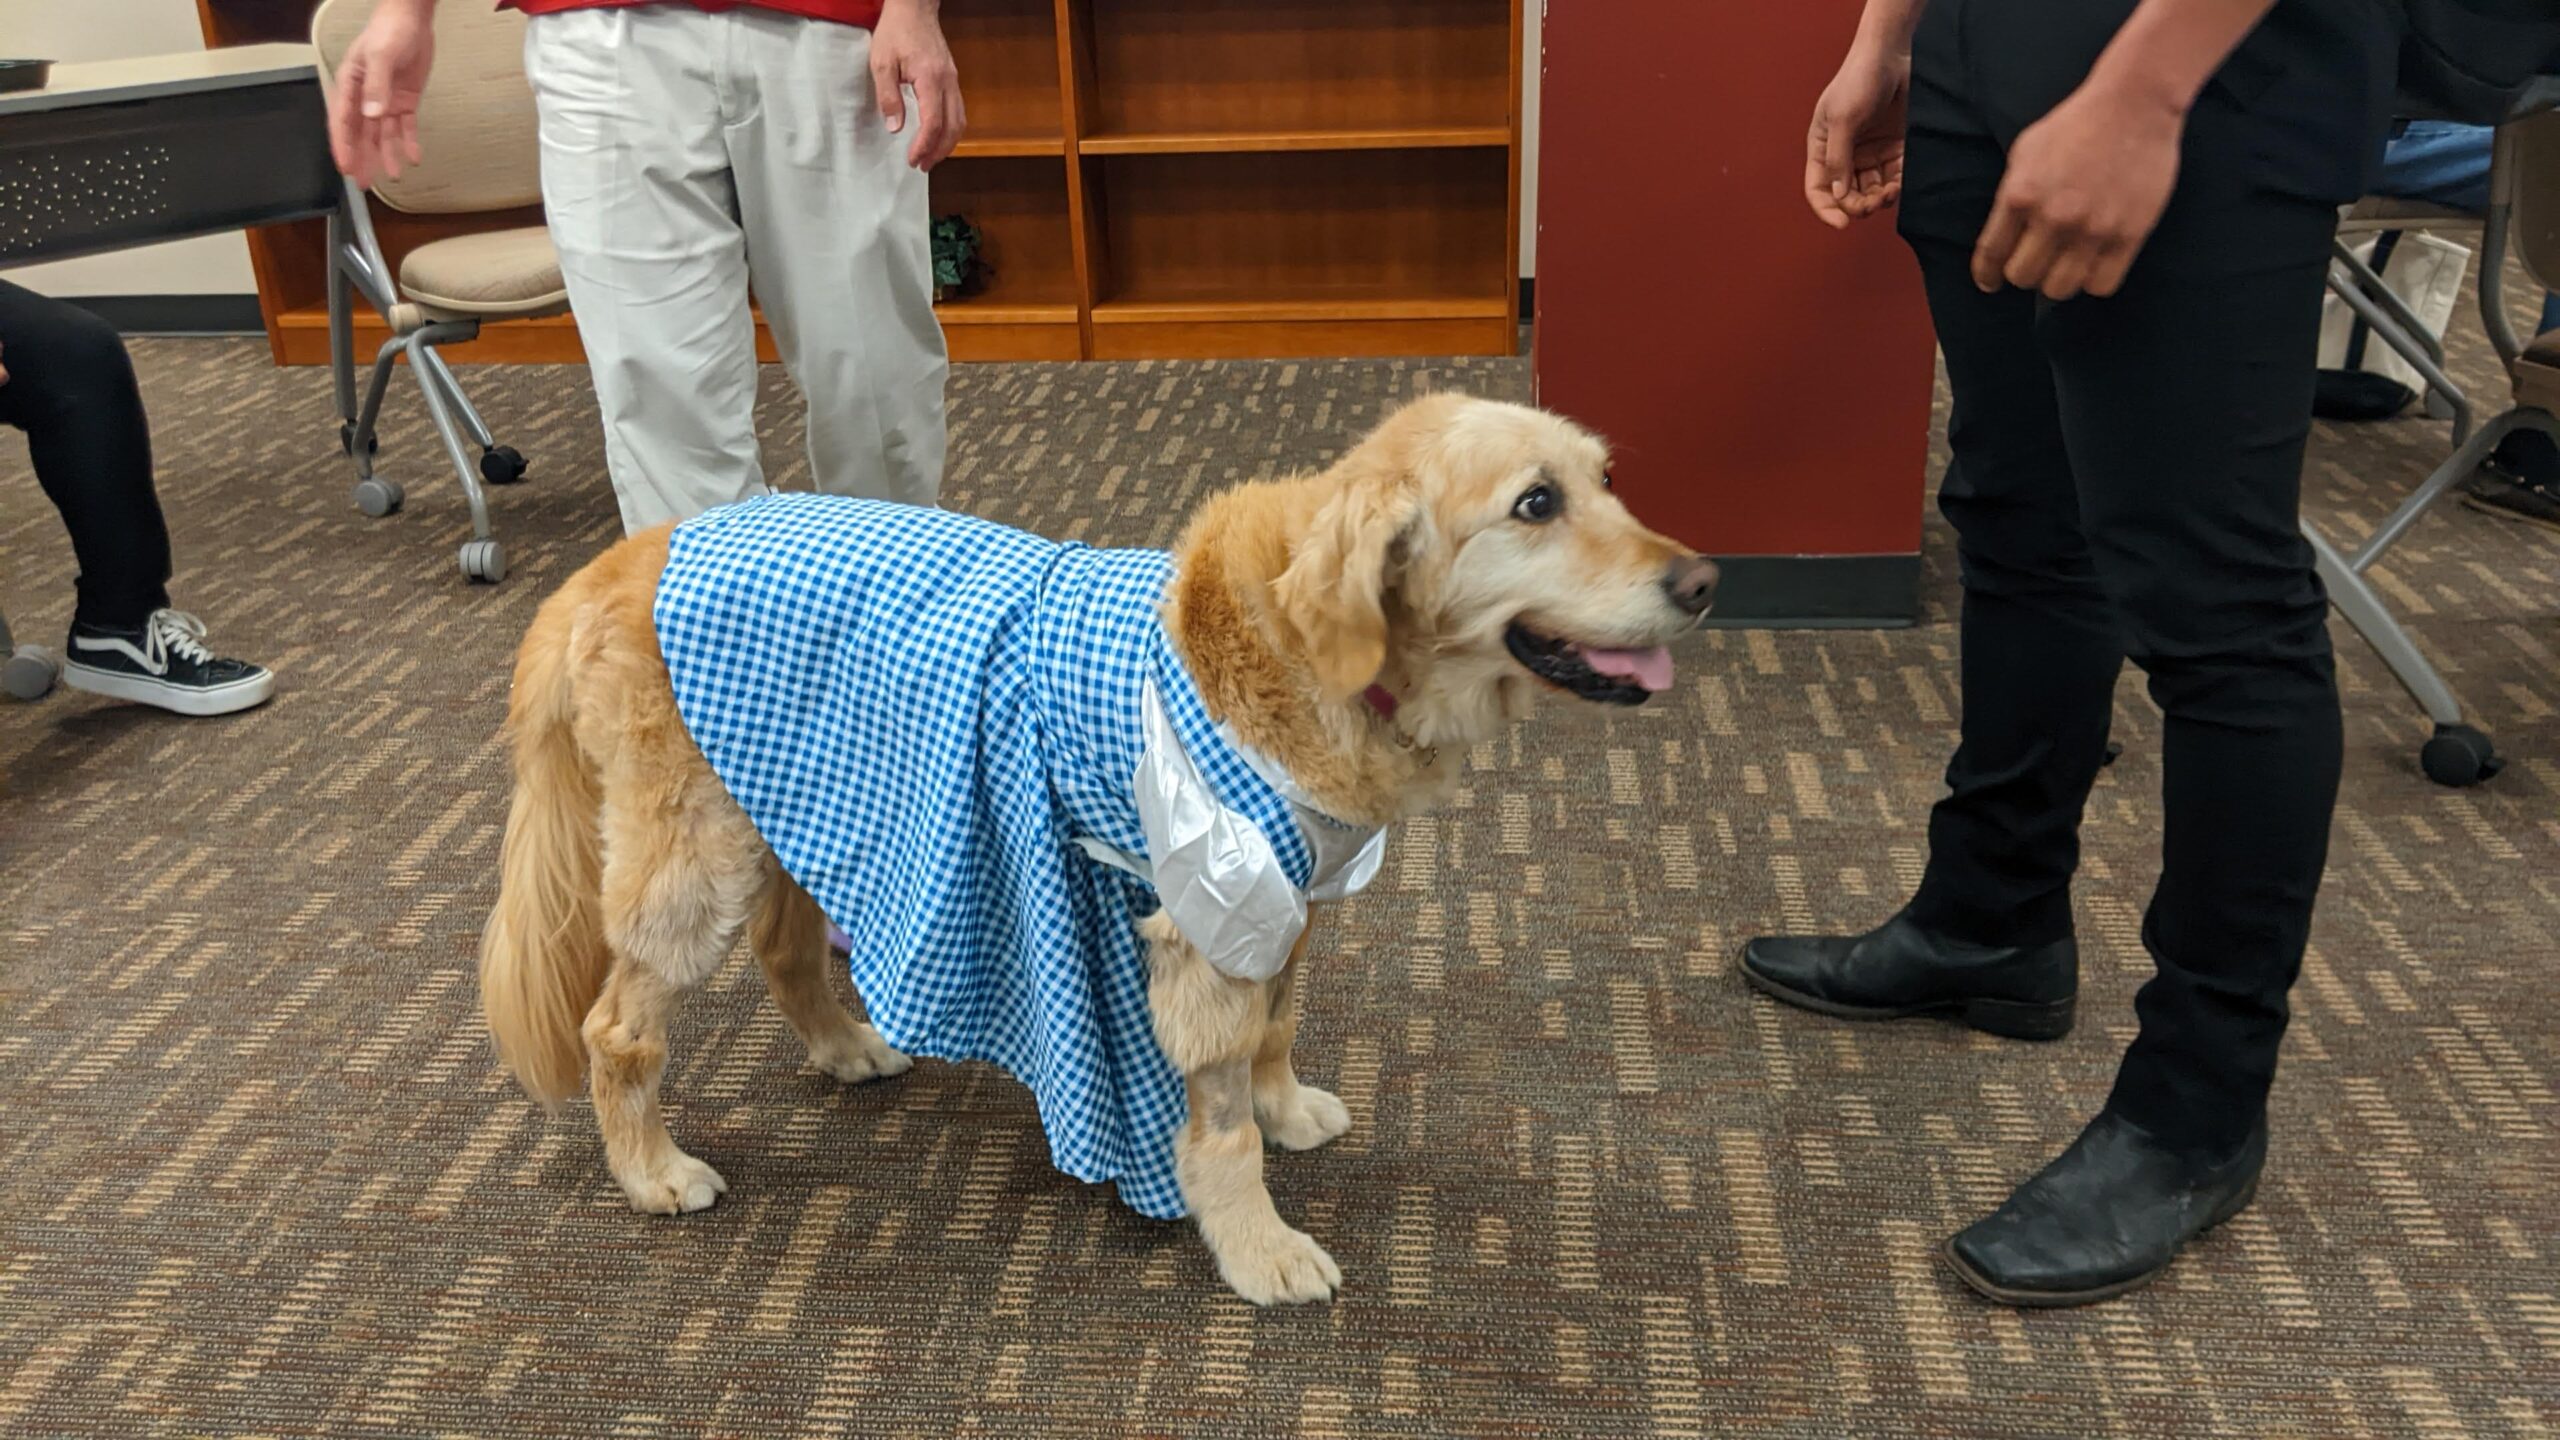 Therapy dog from Happy Tails at the puppy break event in Sturgis Library.